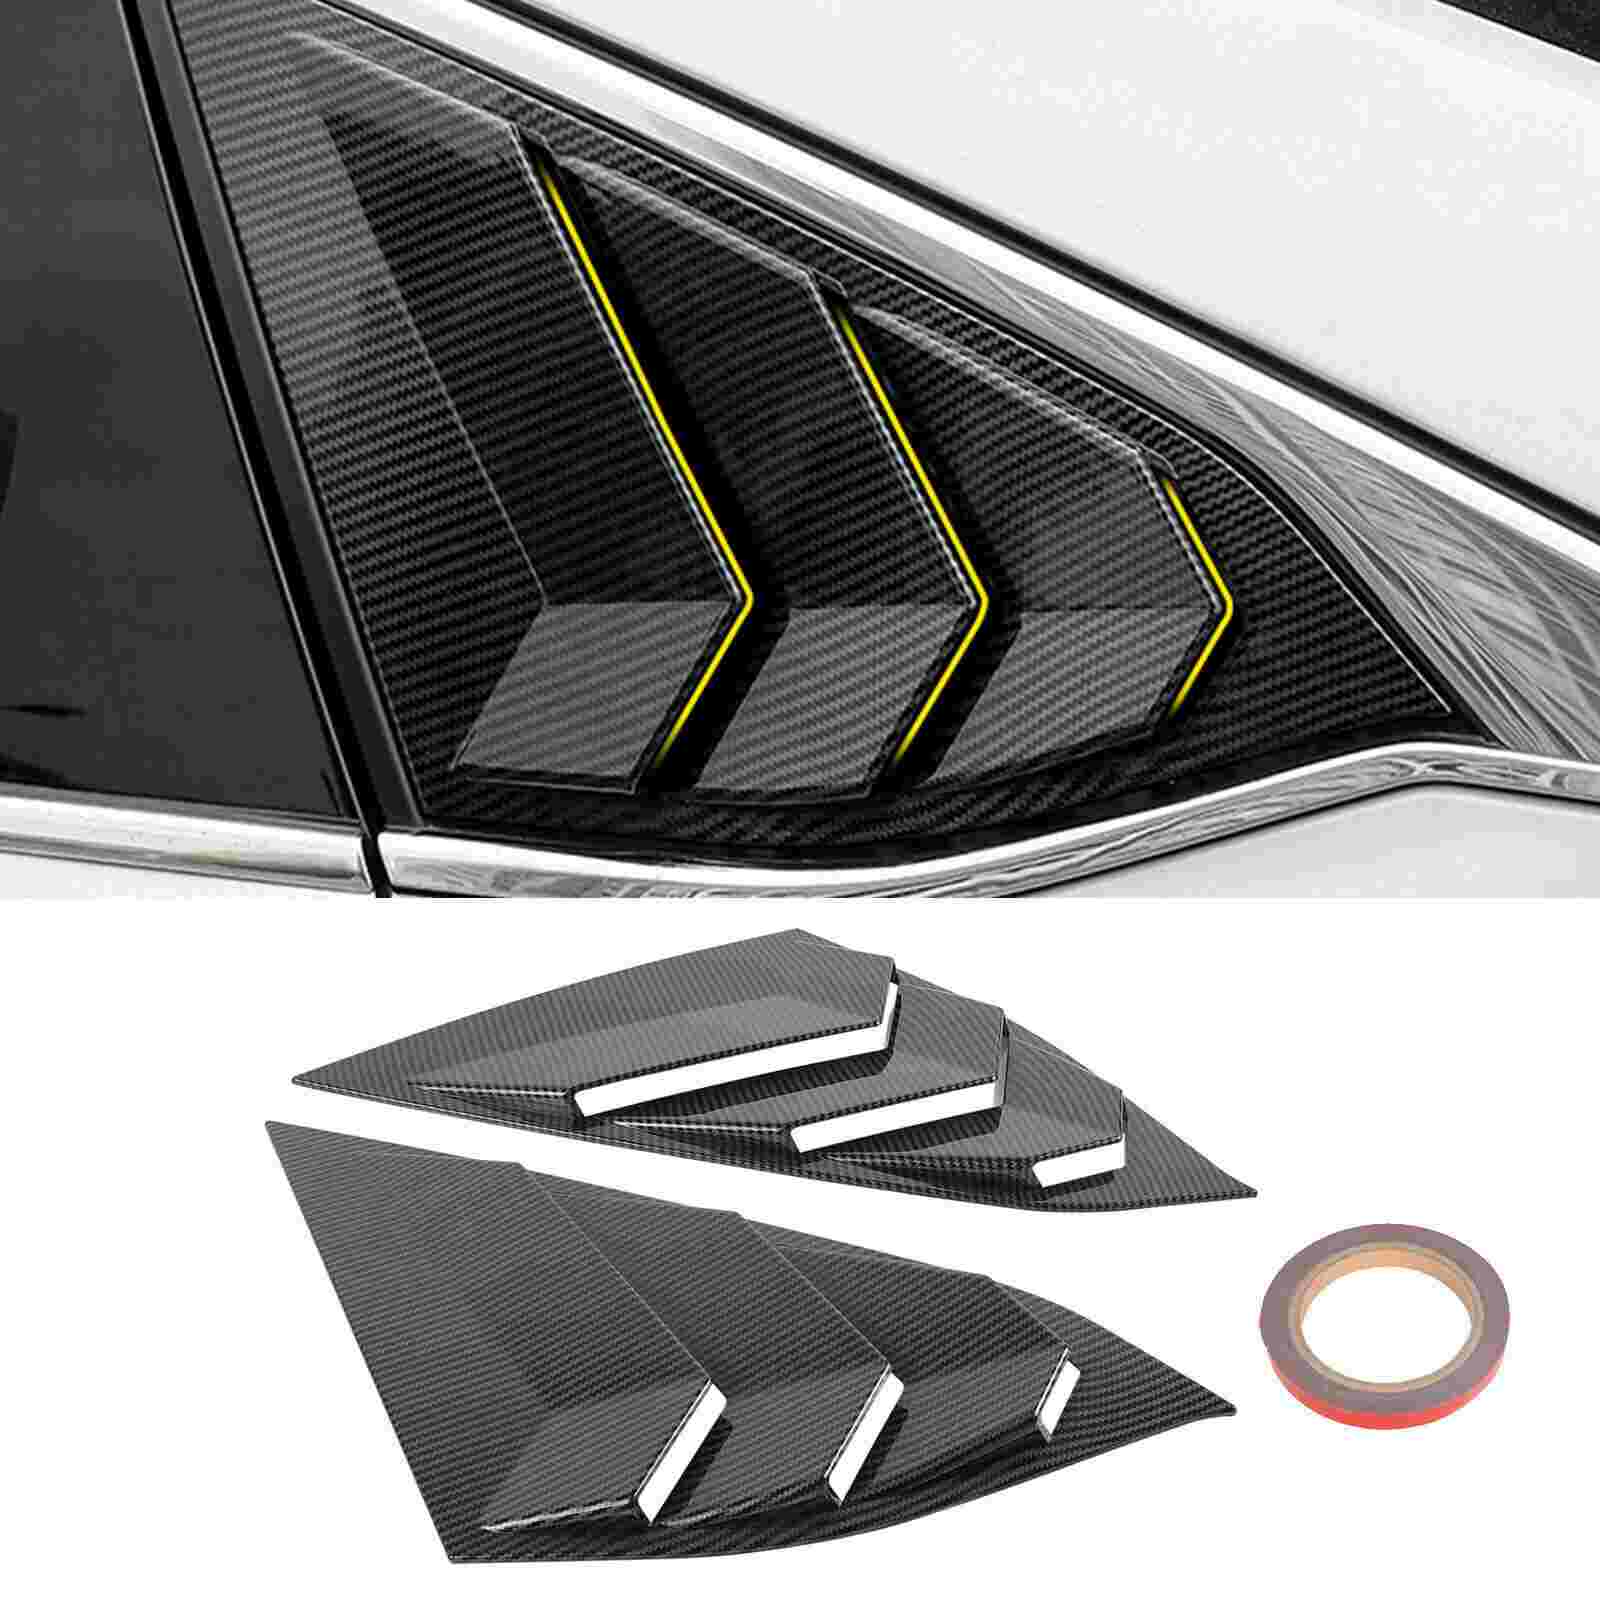 Display of Side Vent Rear Window Louver for 2018+ Honda Accord